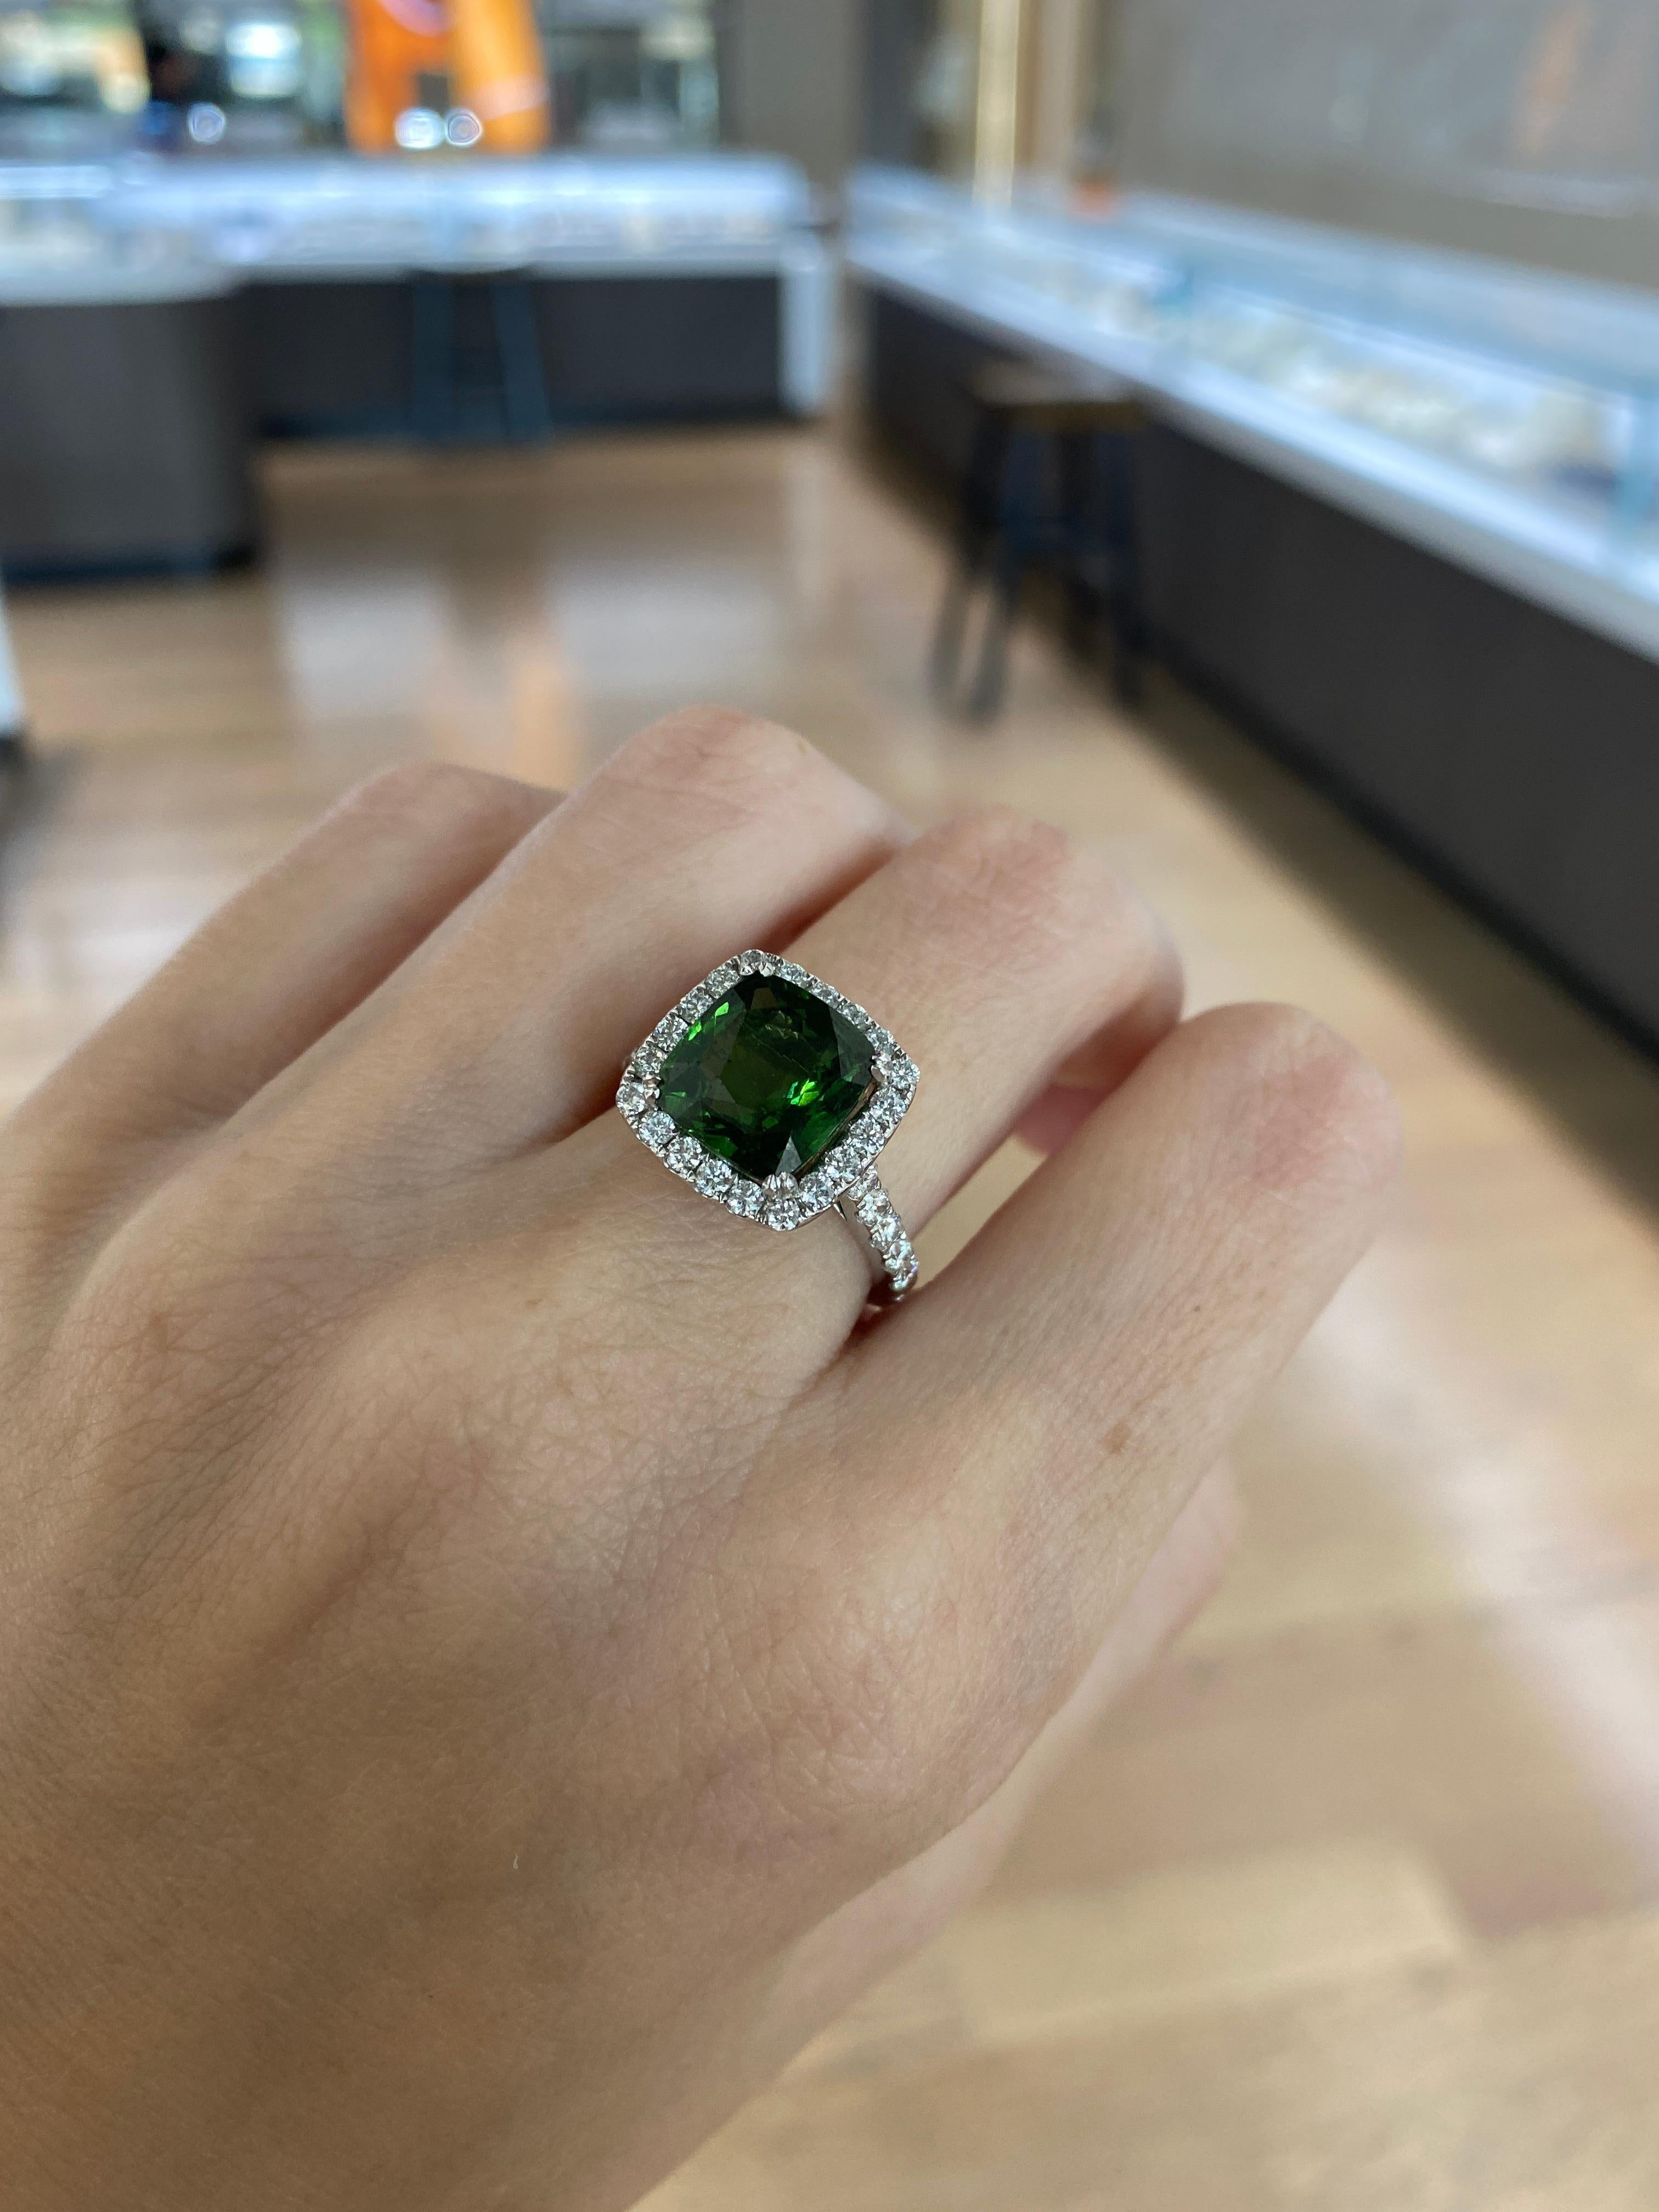 5.42 Carat Cushion Cut Green Zircon Ring with 0.52 Carat Total Diamond Halo In New Condition For Sale In Houston, TX